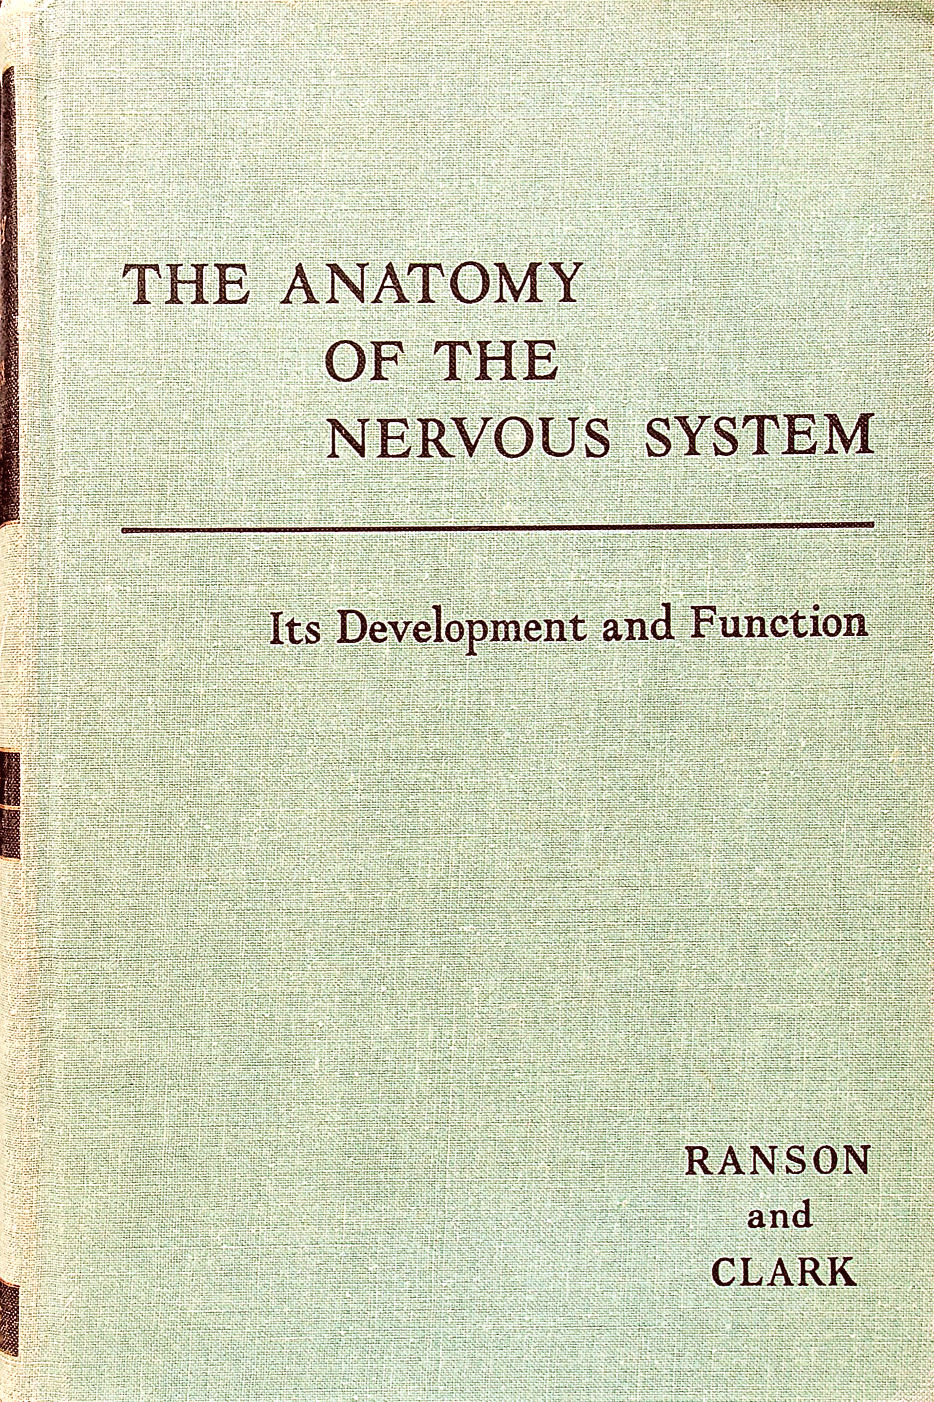 SW RANSON. SL CLARK - The Anatomy of the Nervous System